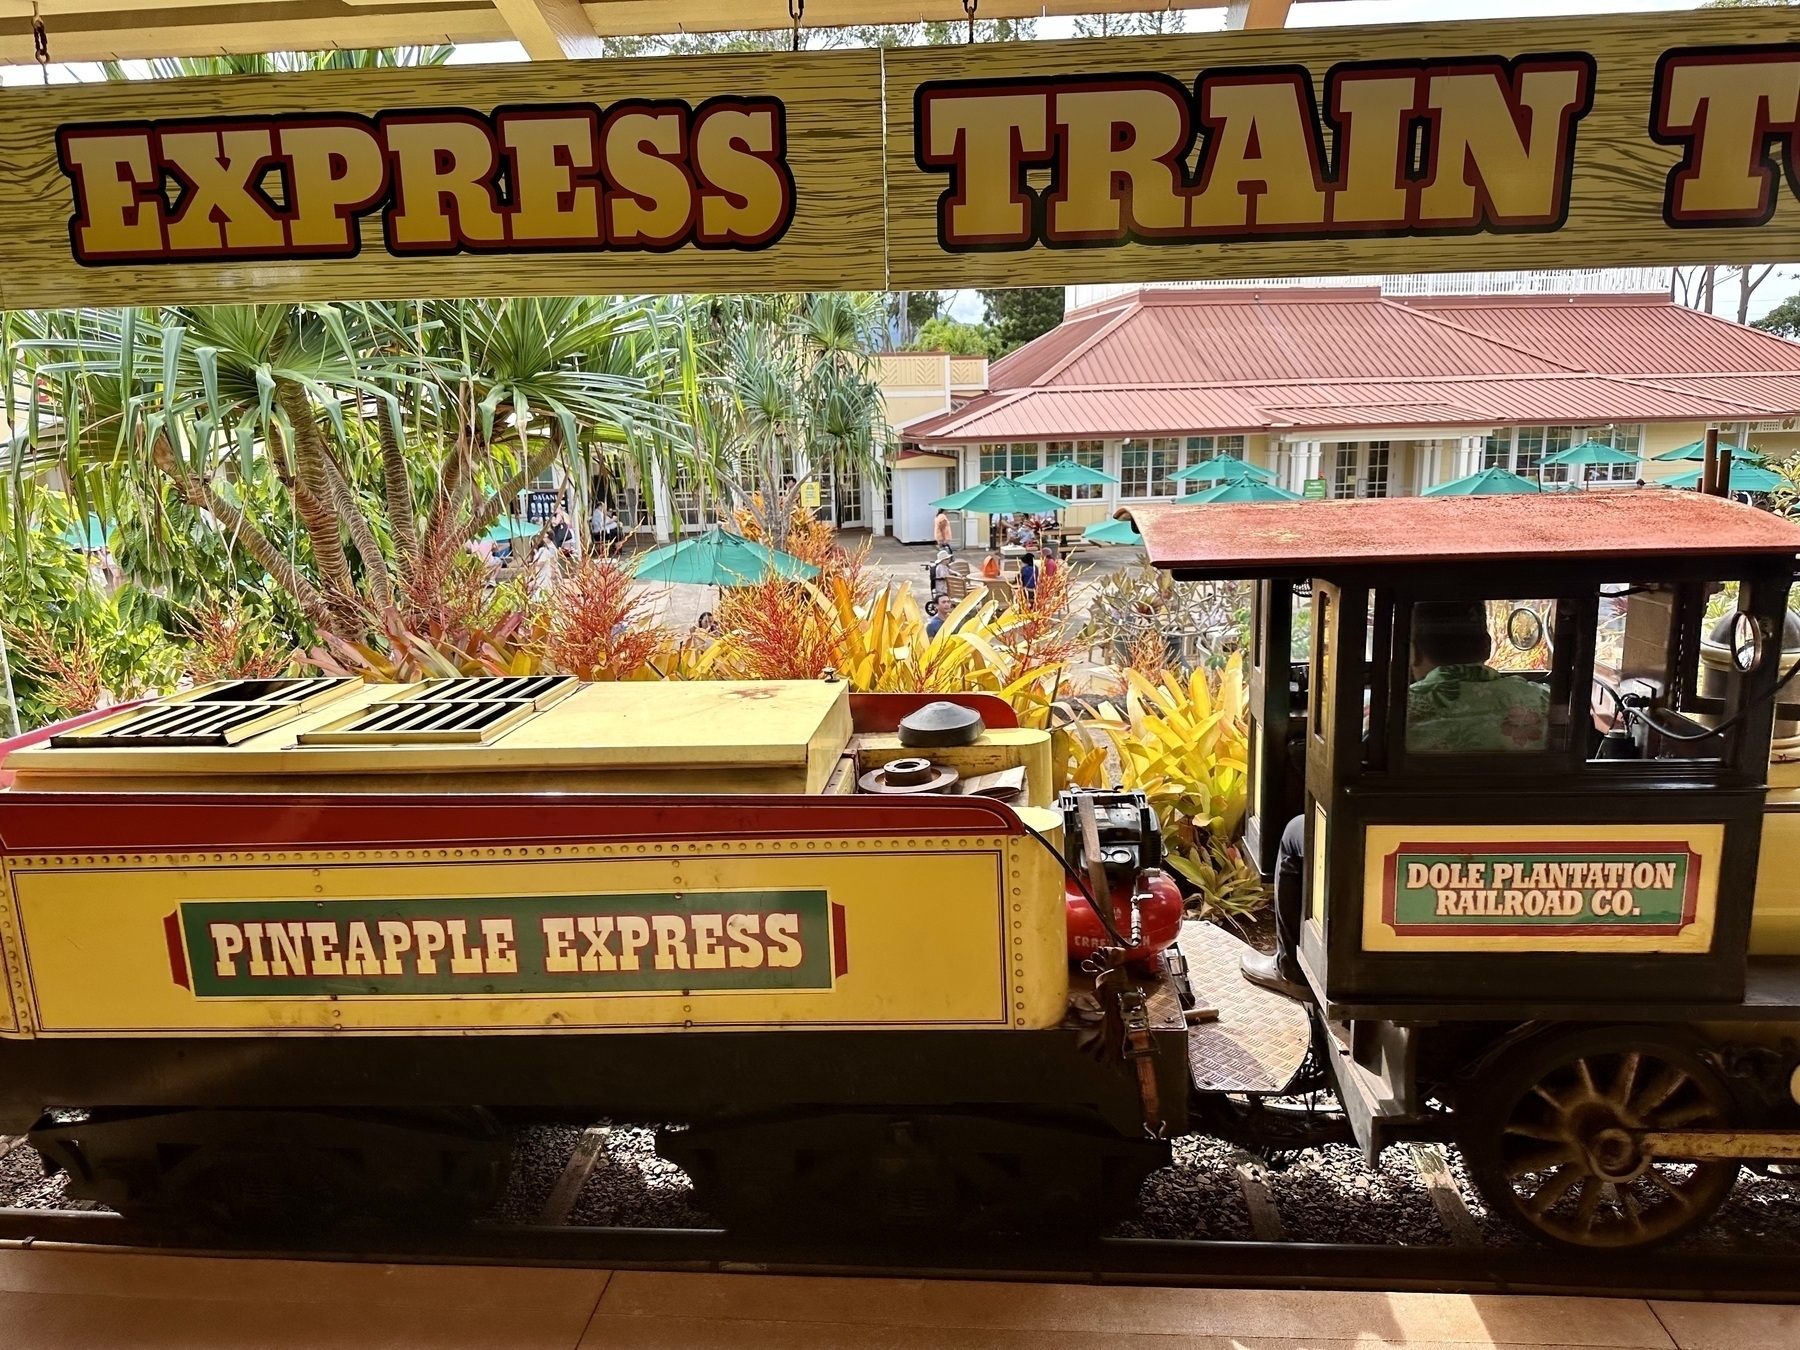 Small, bright yellow train labeled “Pineapple Express”